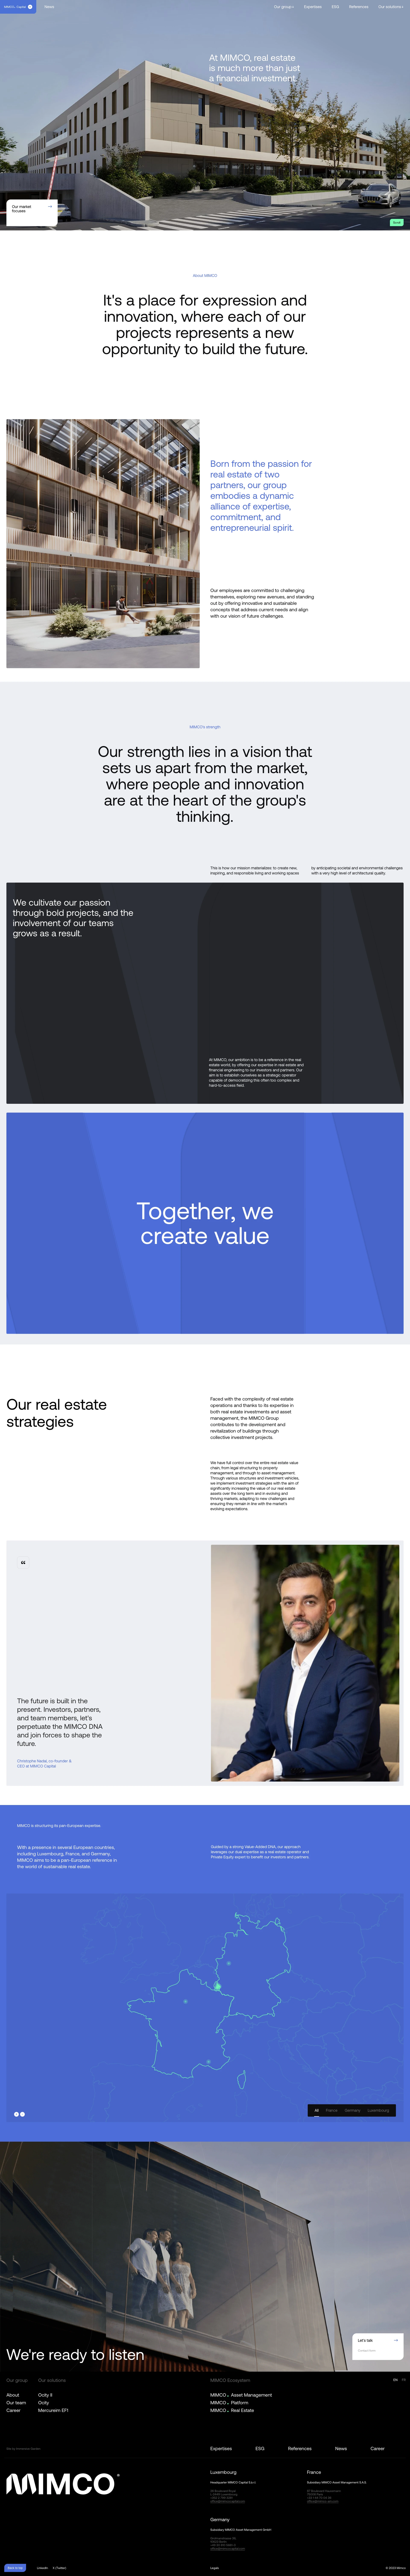 MIMCO Capital Landing Page Example: With this in mind, MIMCO Capital structures, develops and supports the development of real estate investment vehicles. Through them, professional investors can access leading management and strategies that would normally be out of reach.